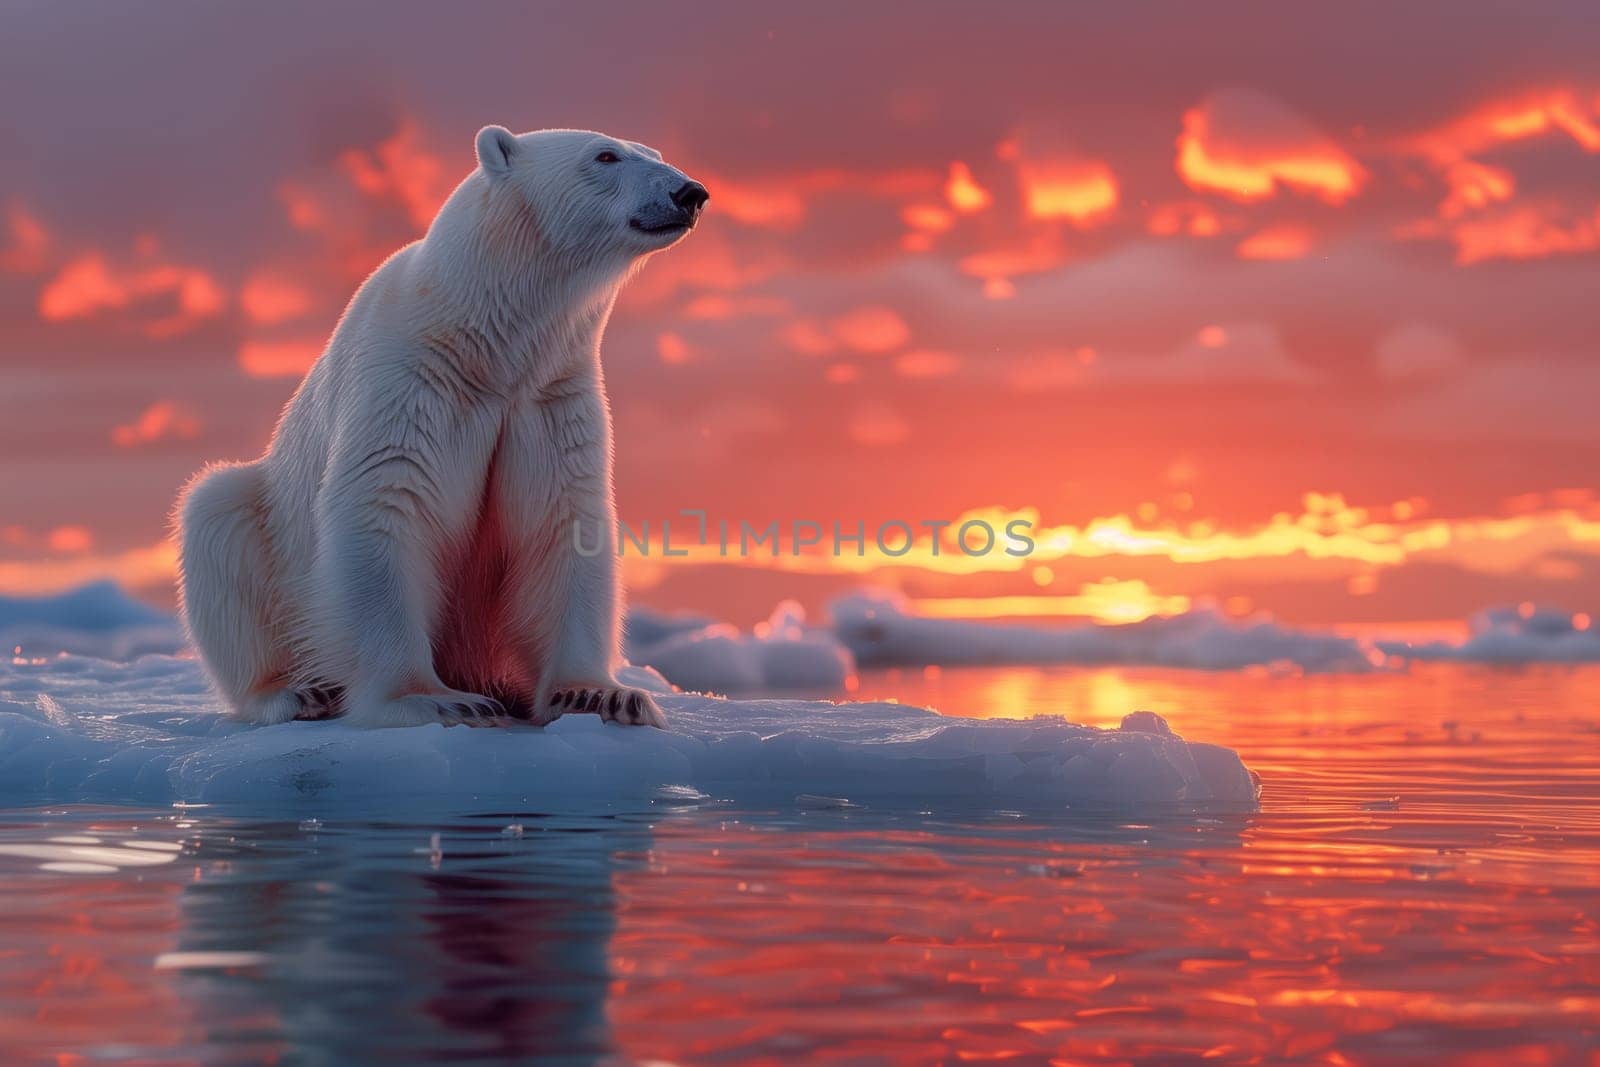 A carnivorous polar bear with a powerful snout sits on a floating piece of polar ice cap in the water, surrounded by a vast icy landscape